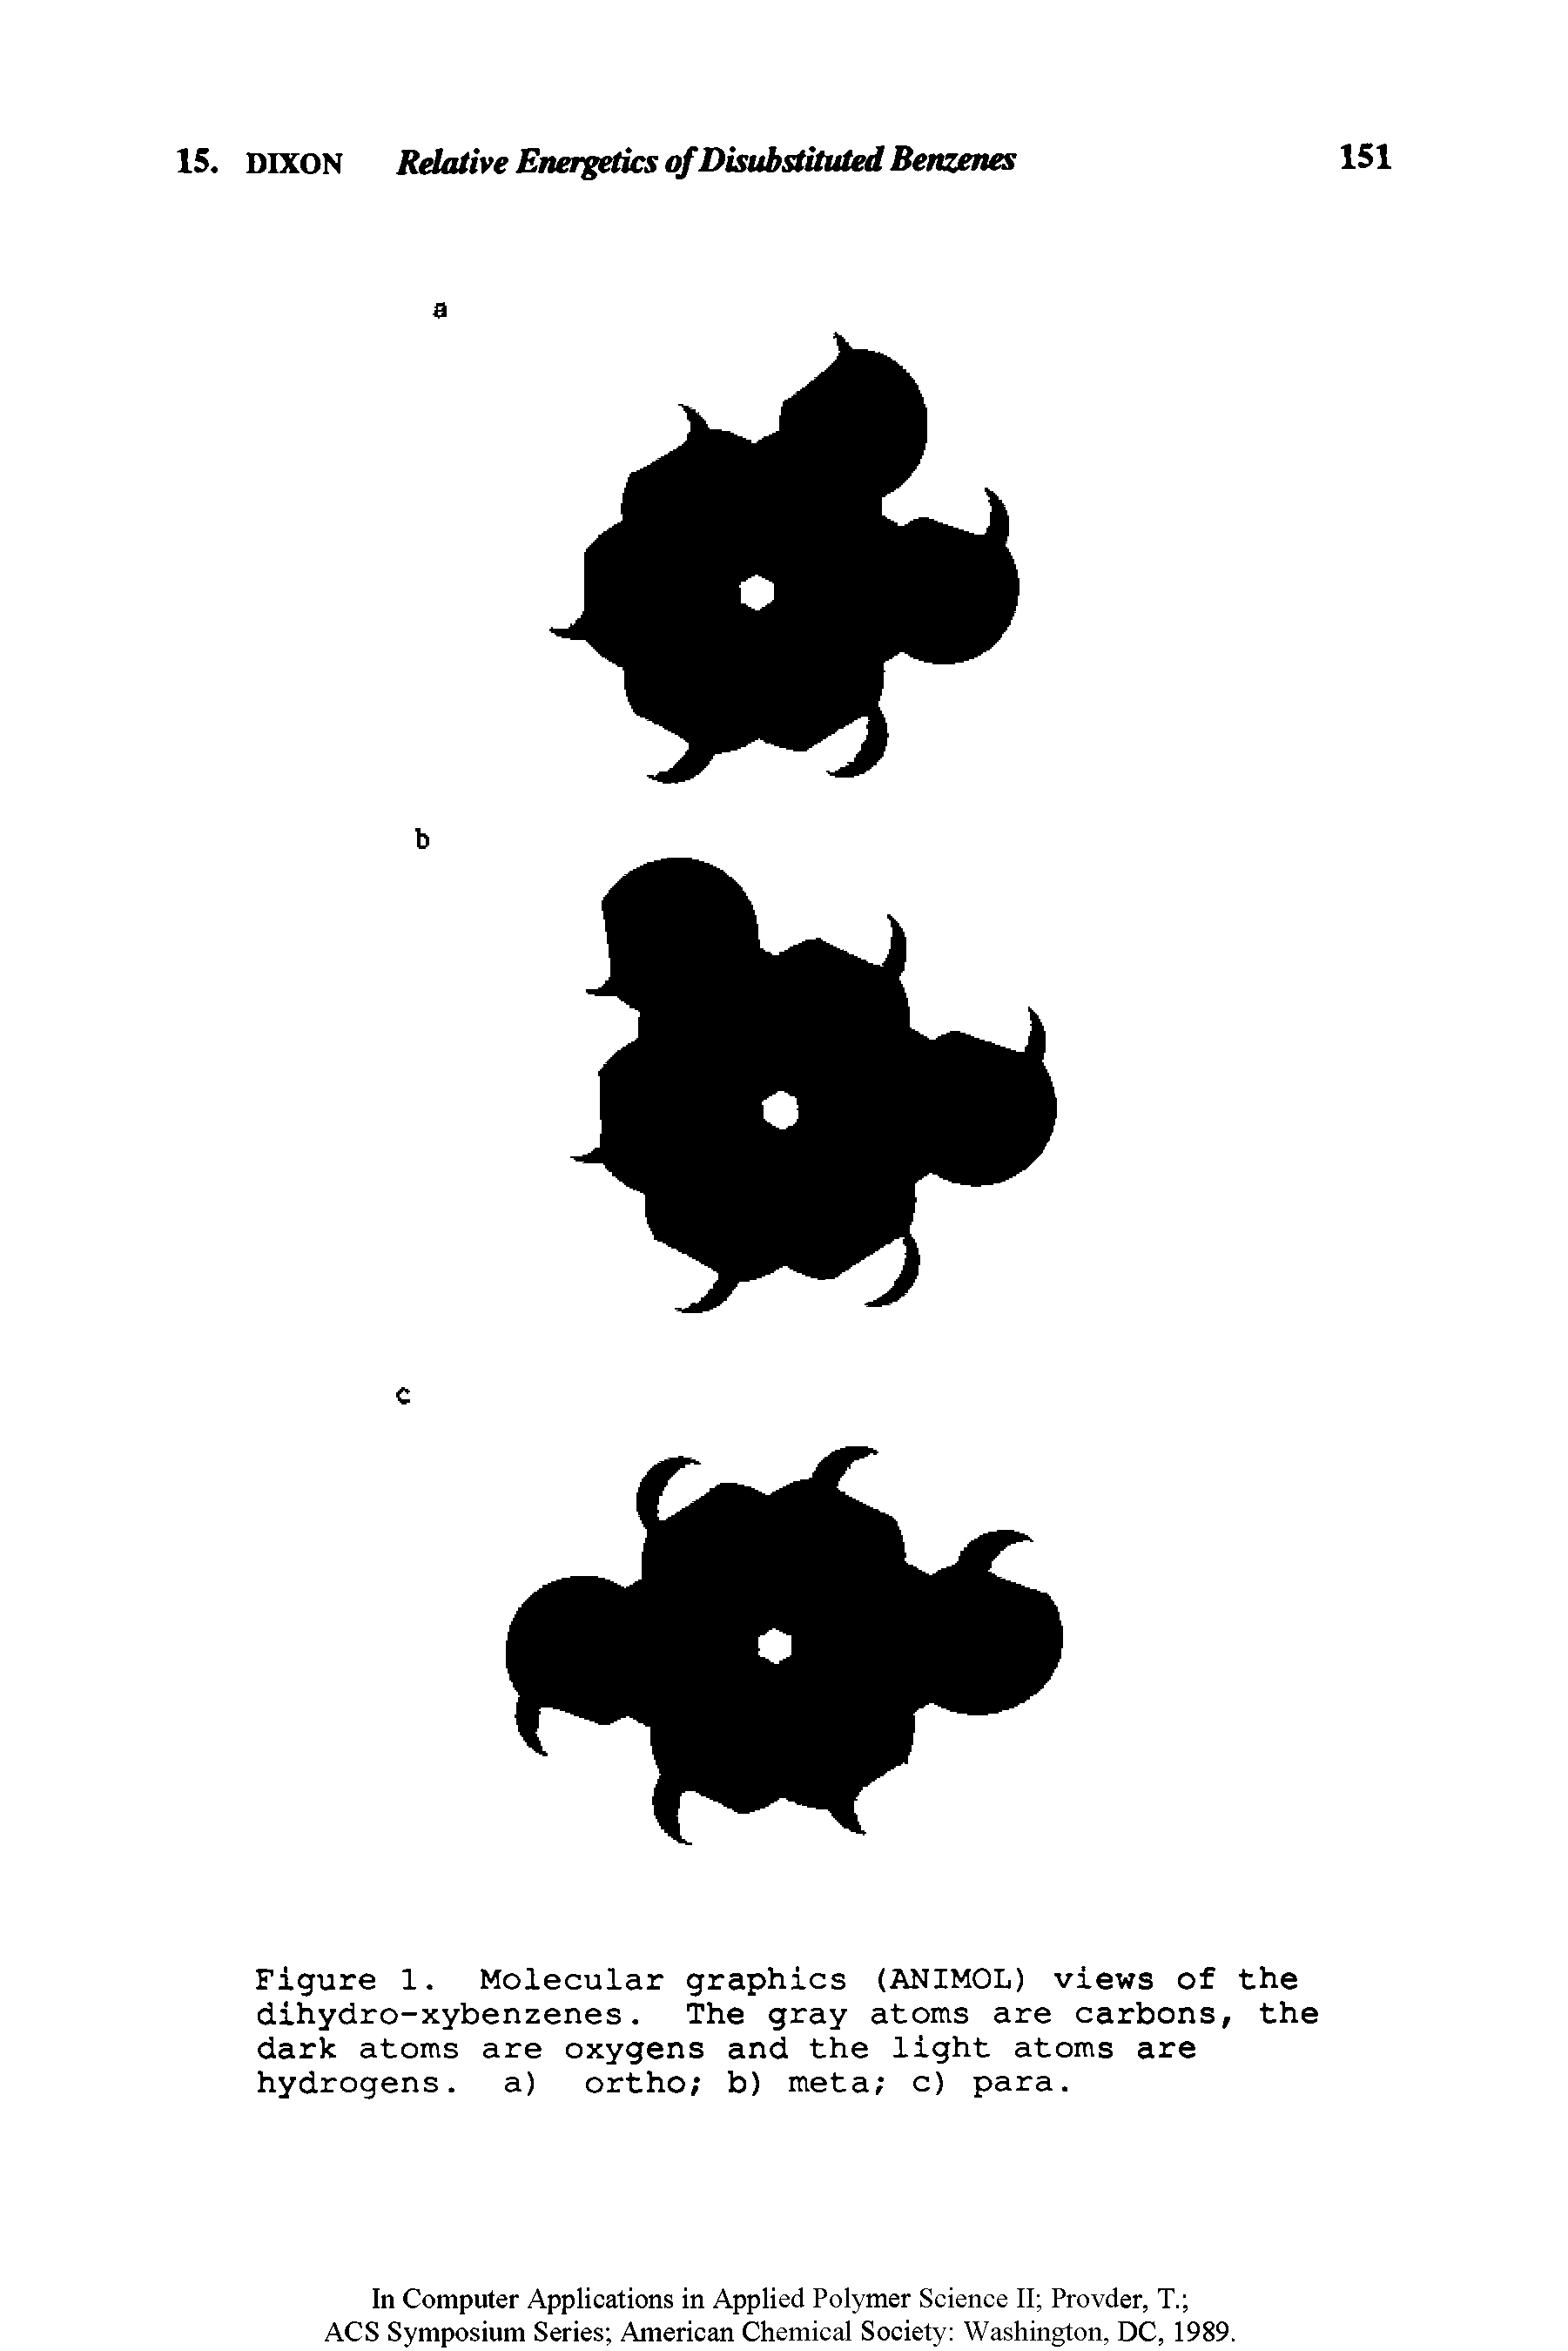 Figure 1. Molecular graphics (ANIMOL) views of the dihydro-xybenzenes. The gray atoms are carbons, the dark atoms are oxygens and the light atoms are hydrogens. a) ortho b) meta c) para.